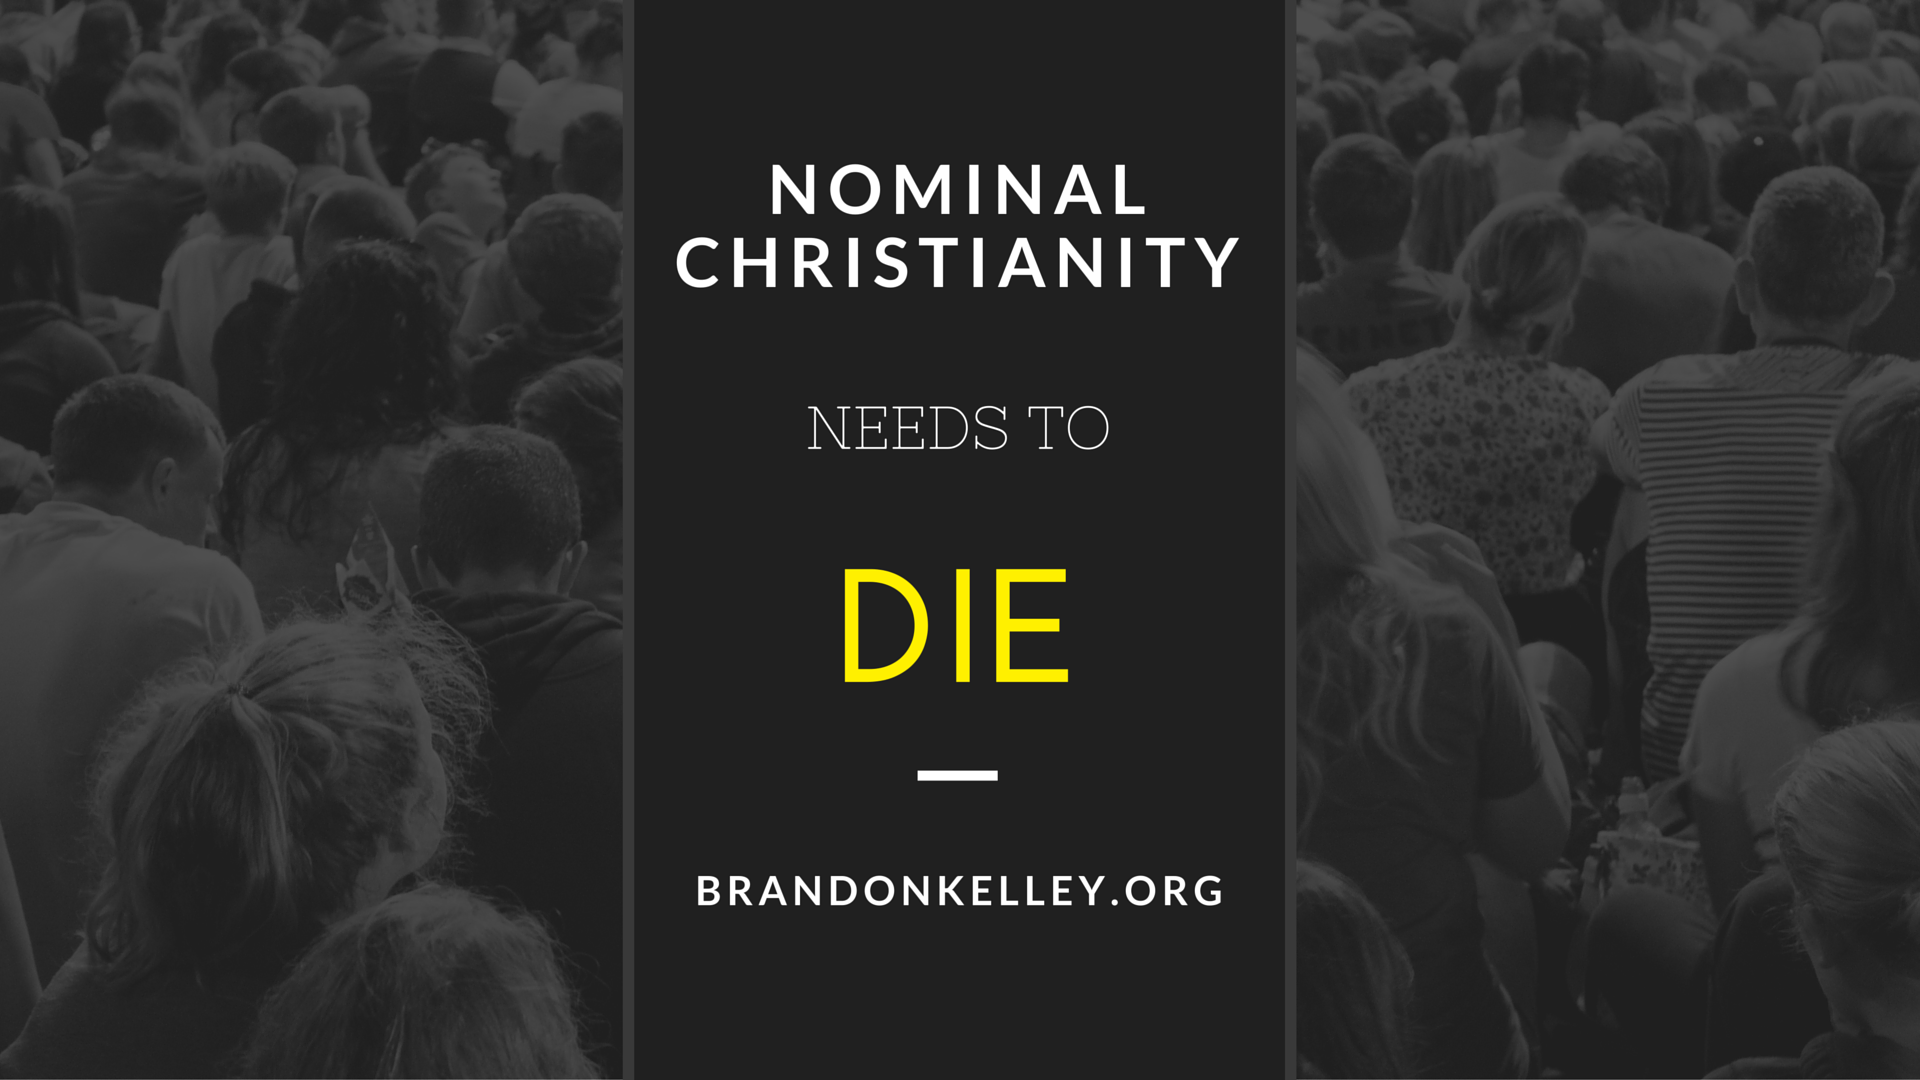 Nominal Christianity Needs to Die